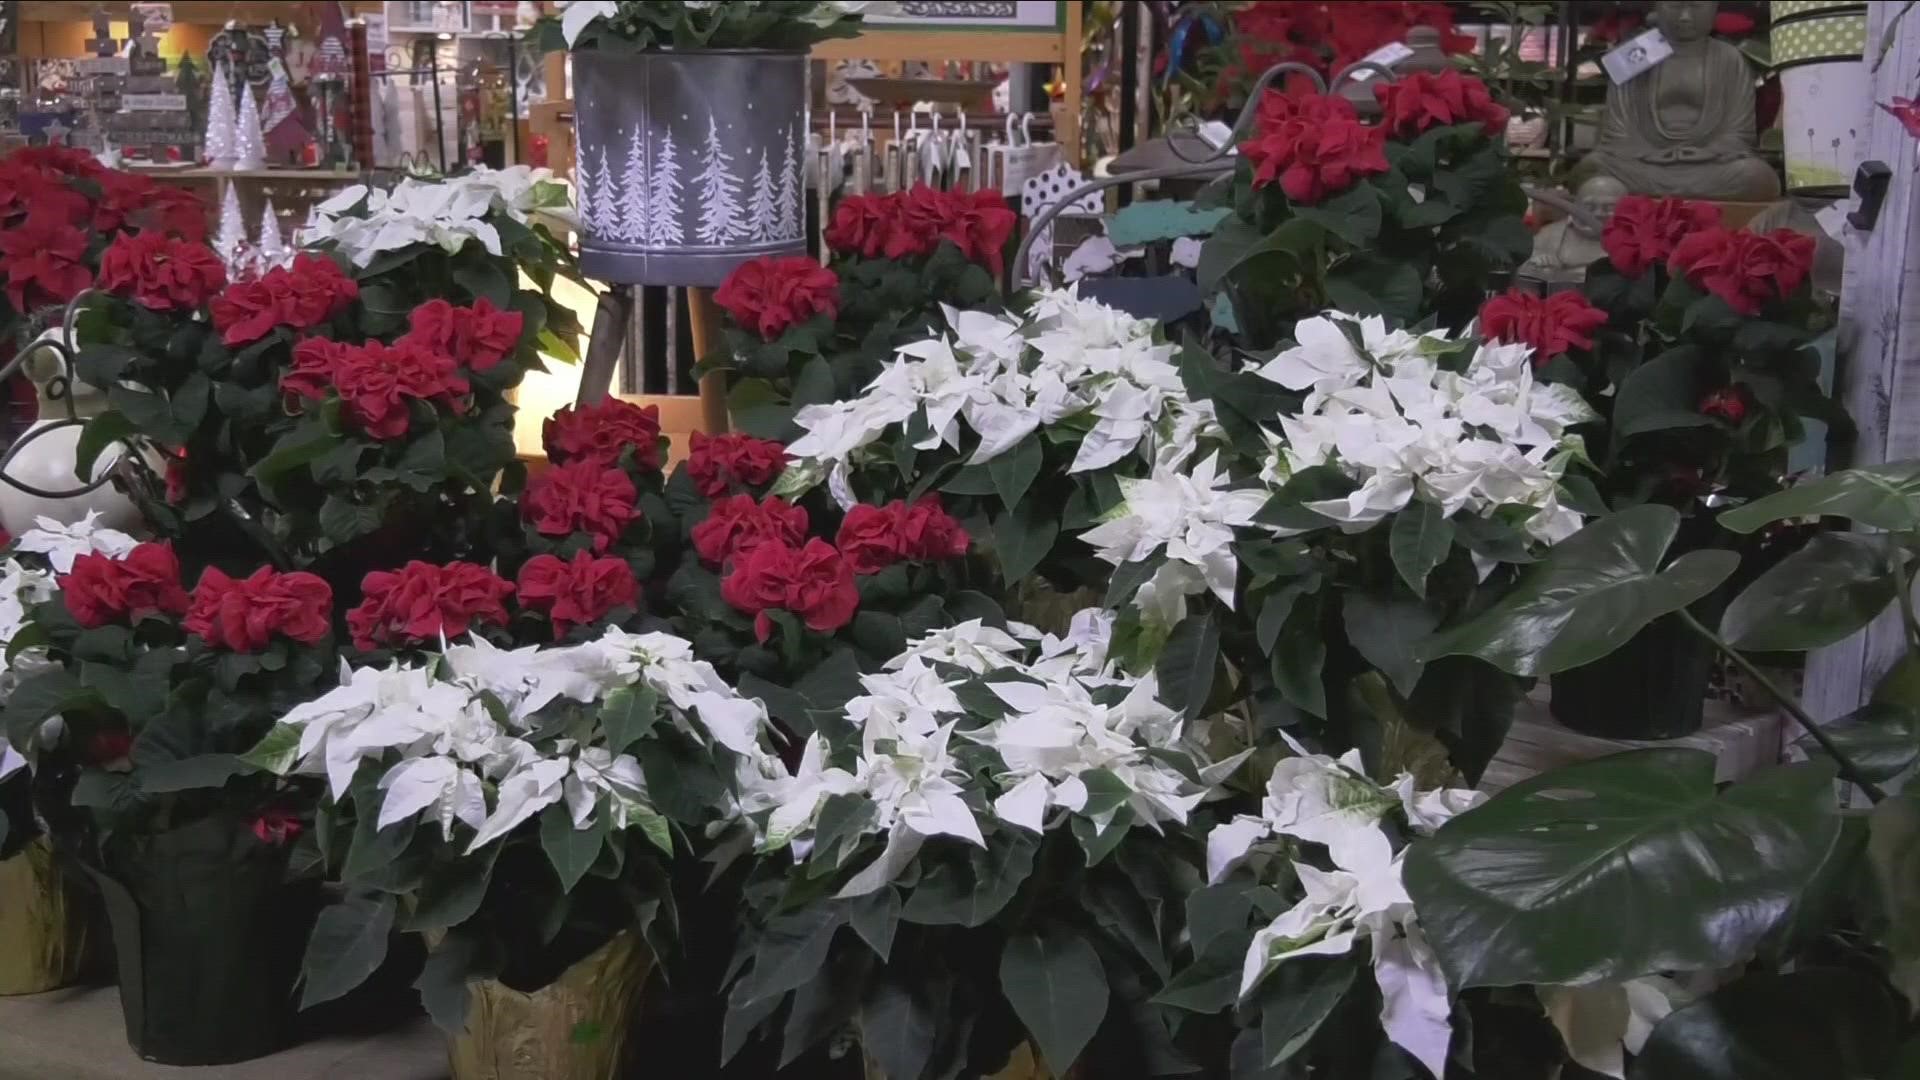 At Seneca greenhouse, there is a huge selection of poinsettias.